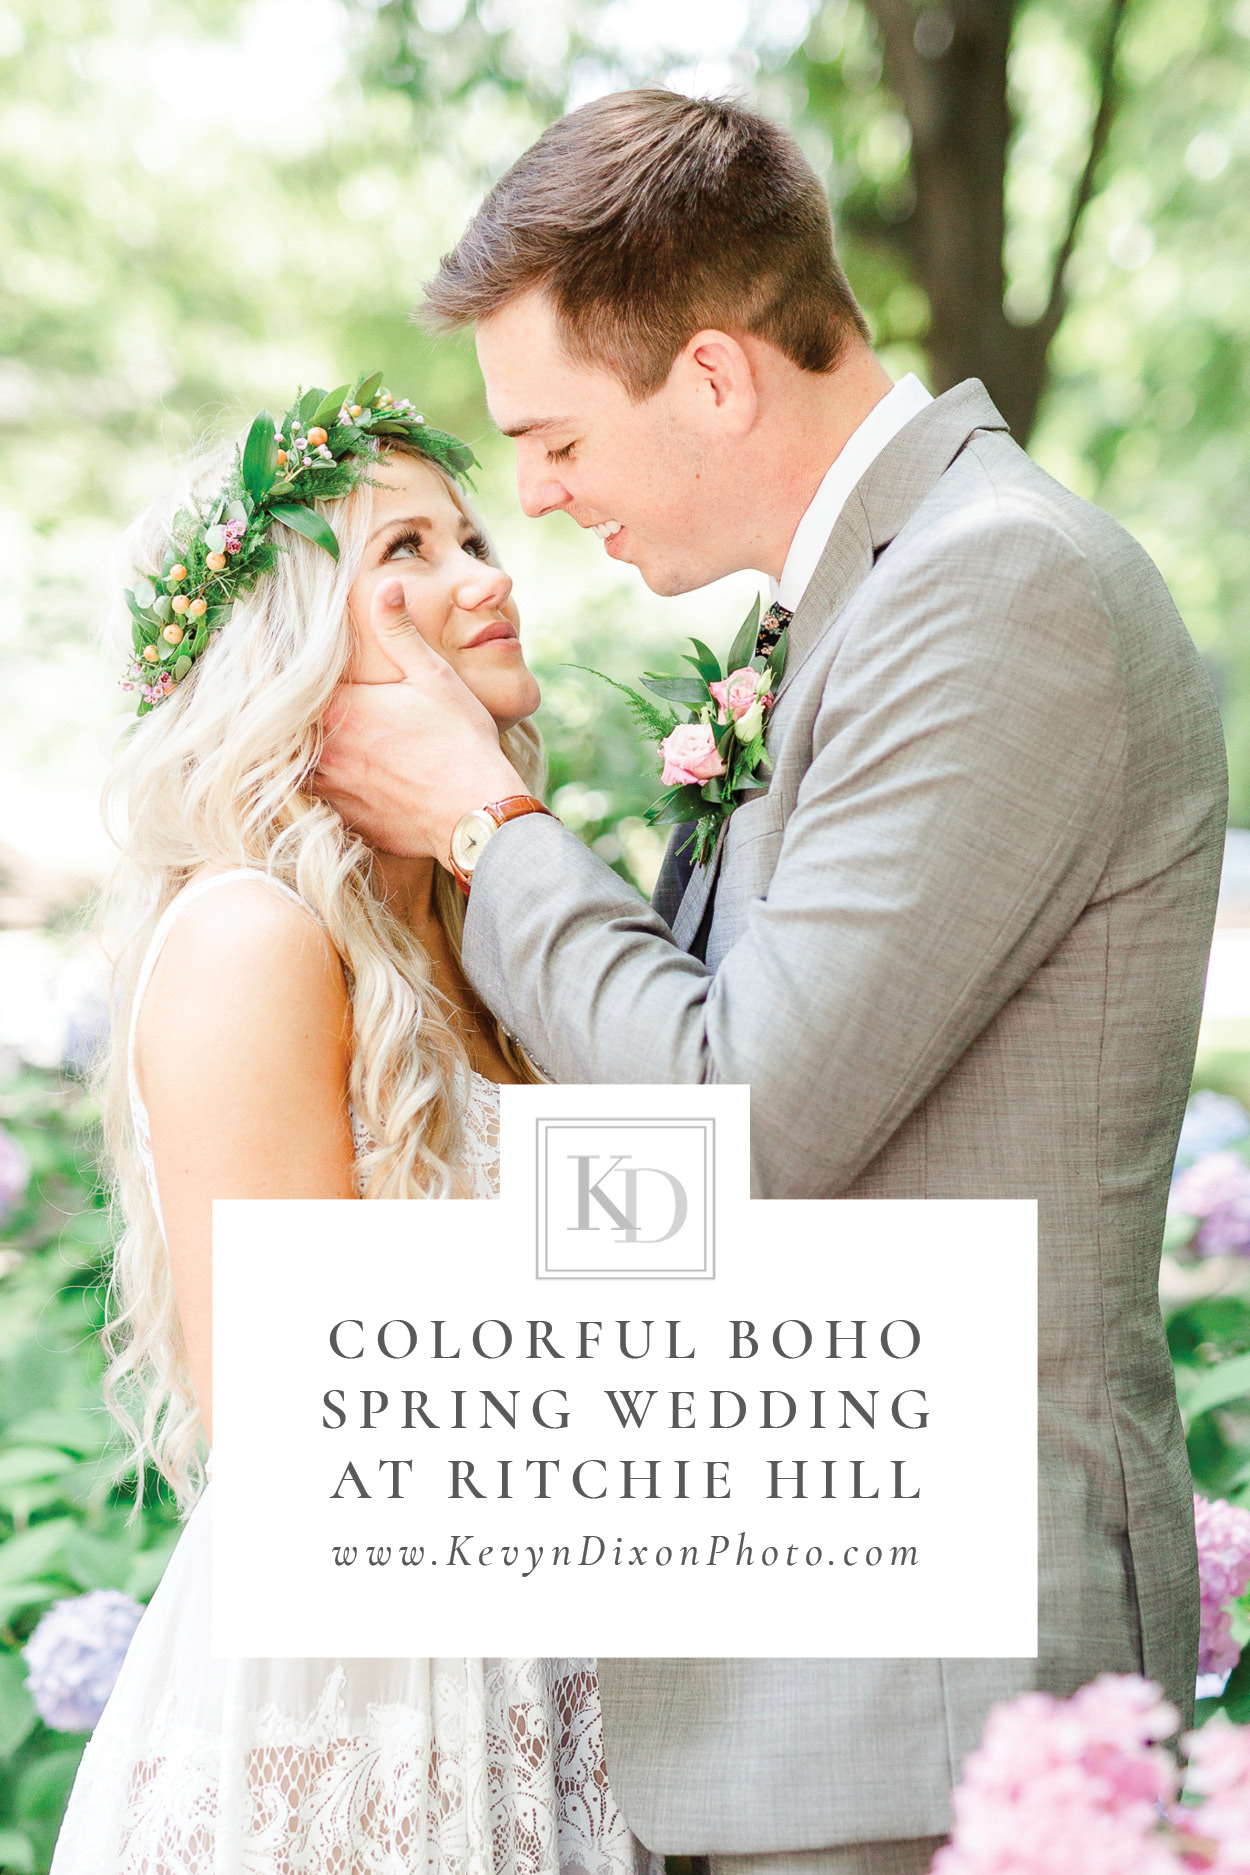 Colorful Boho Spring Wedding at Ritchie Hill Pin Image